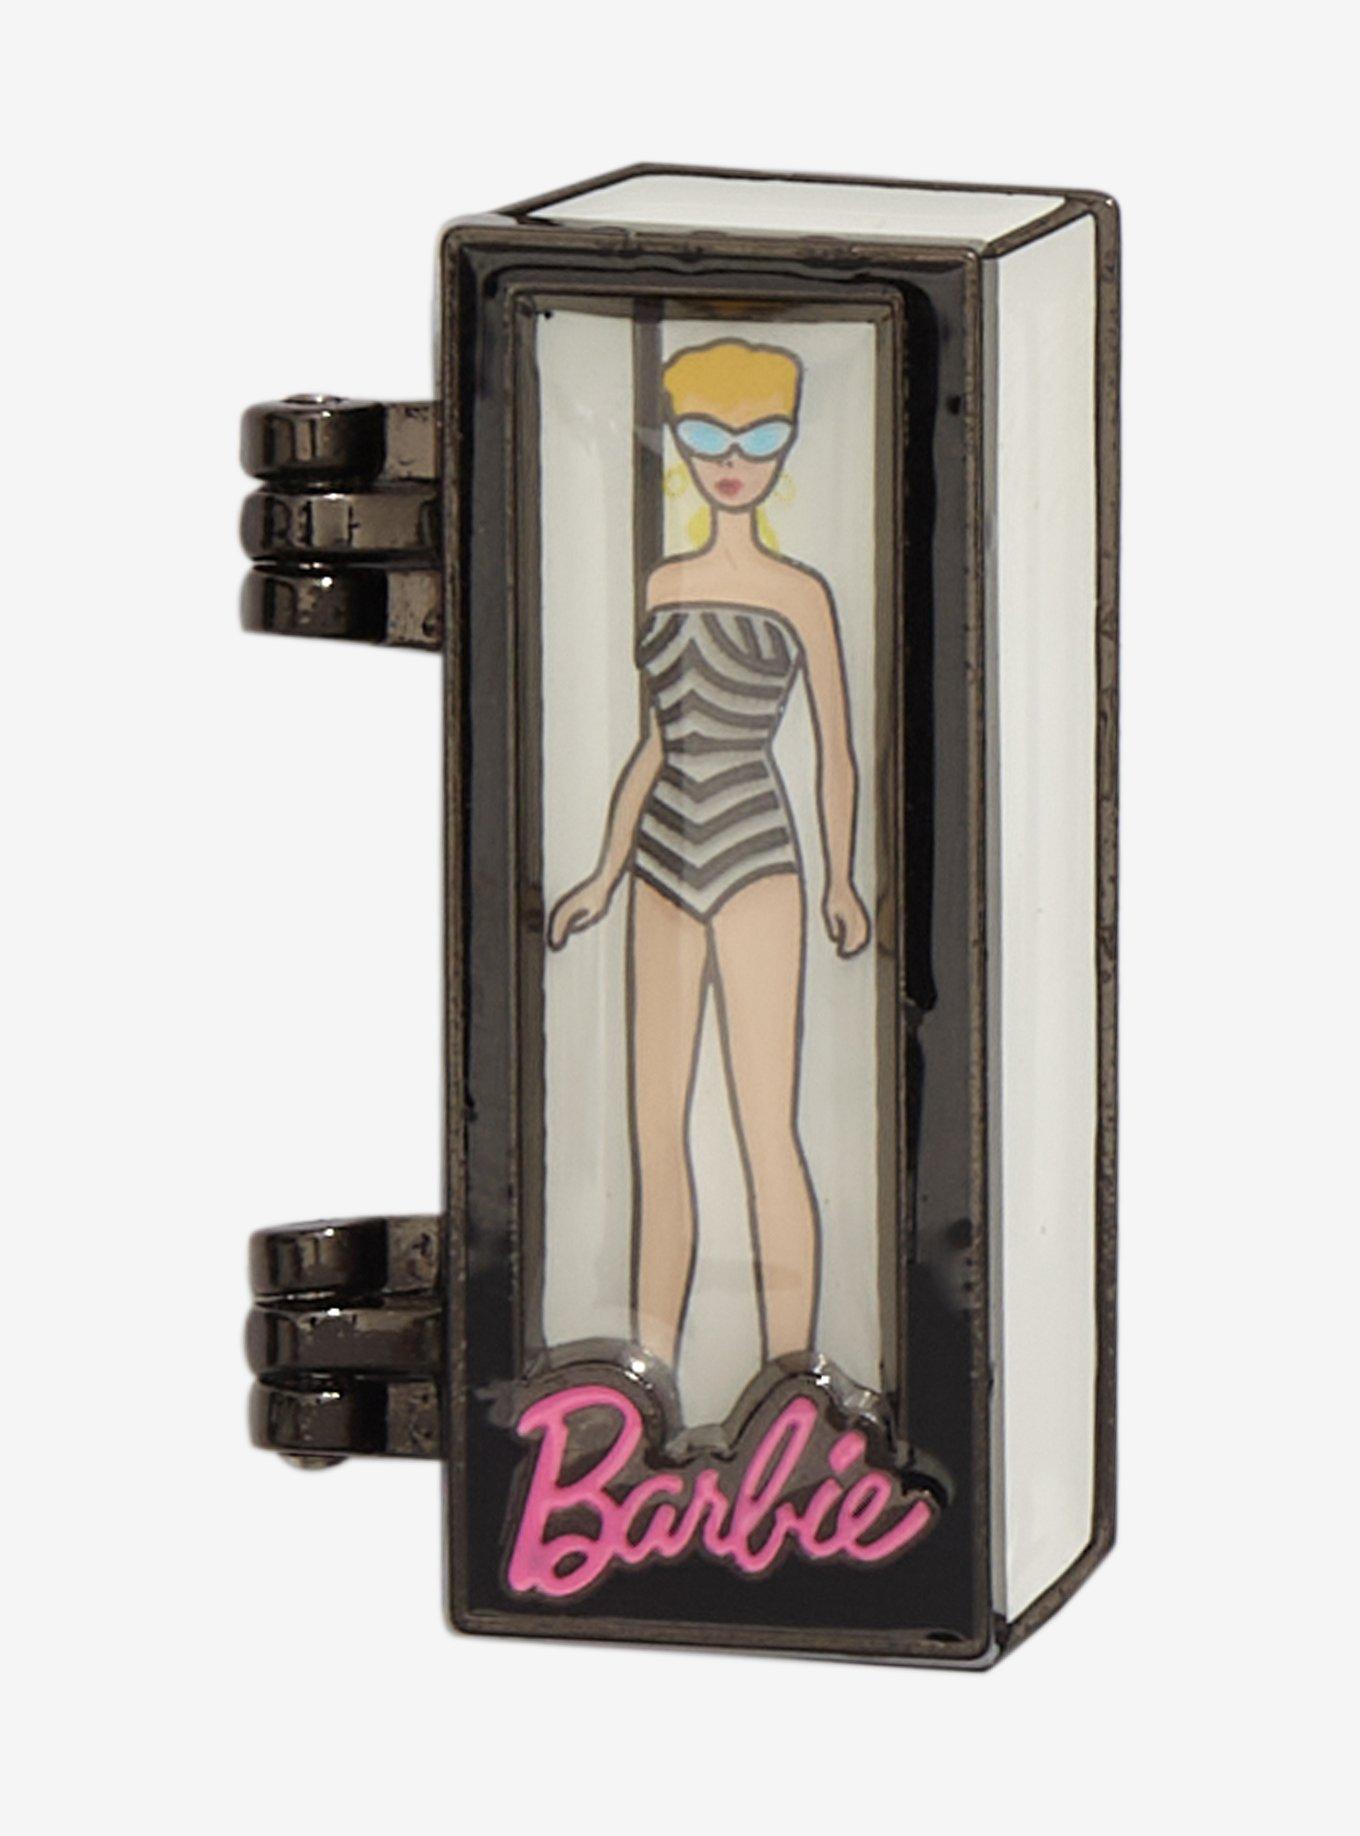 set of 2 BARBIE iron on patches (new in original packages)